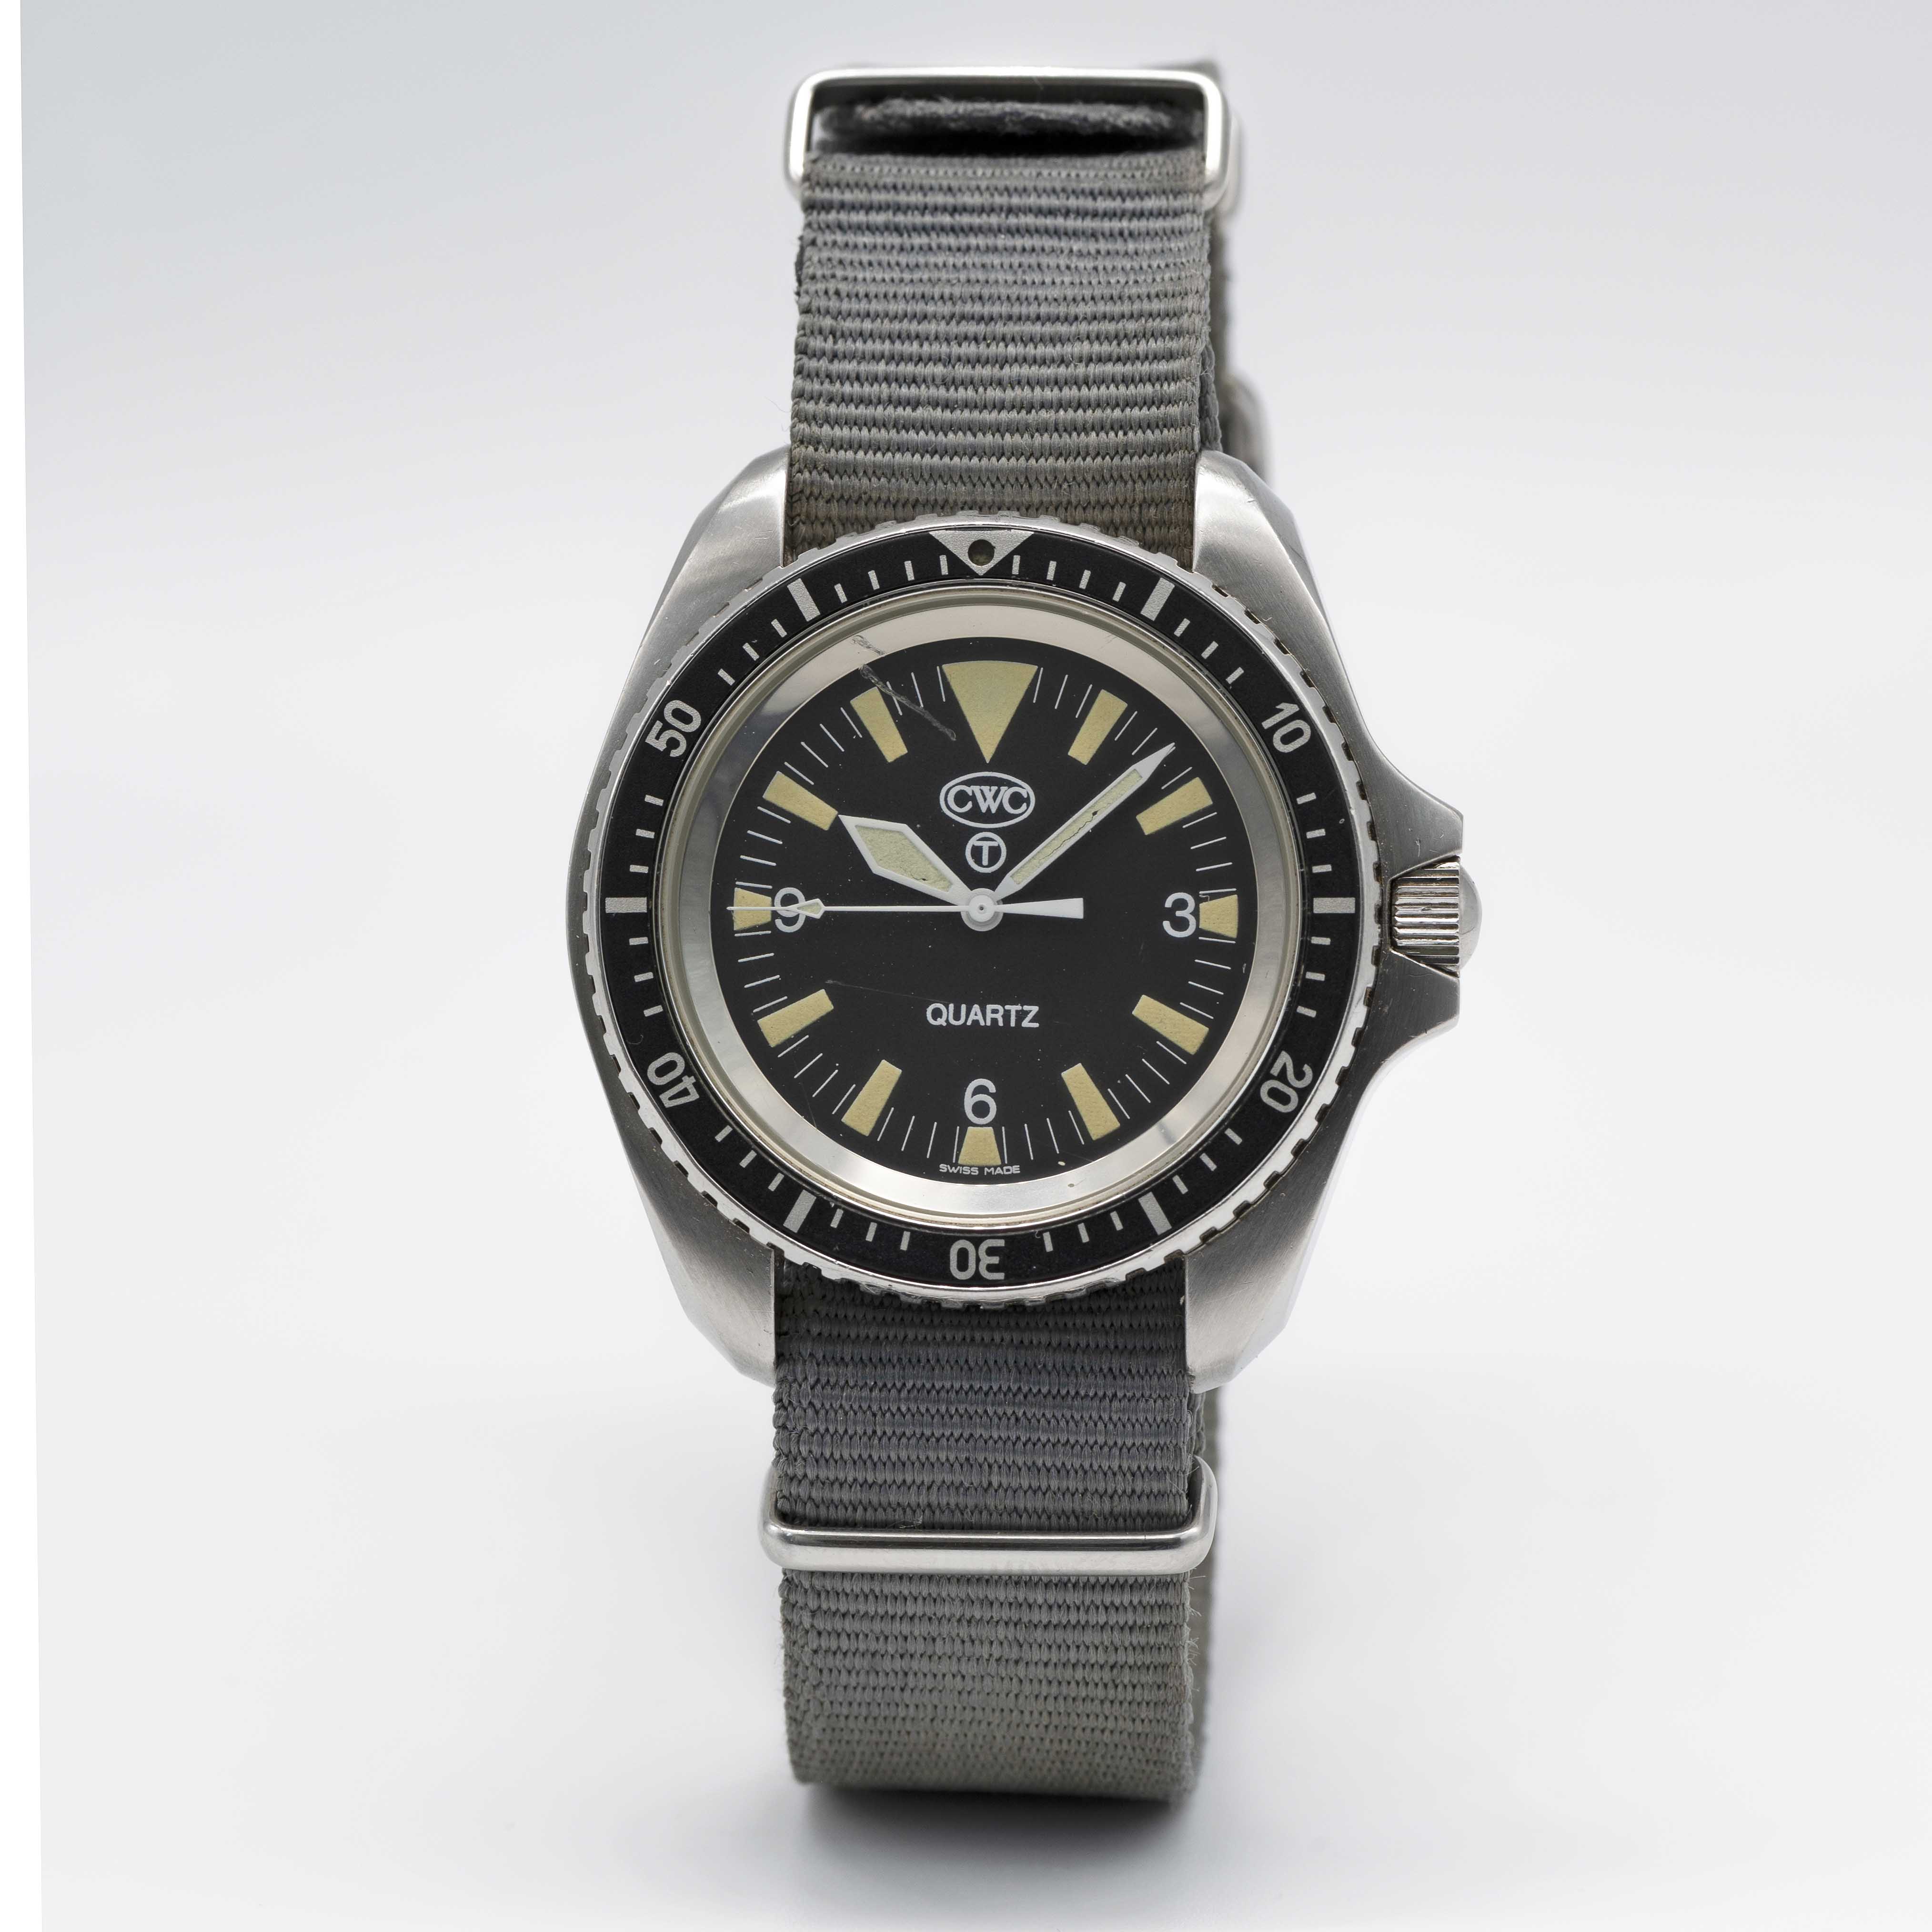 A GENTLEMAN'S STAINLESS STEEL BRITISH MILITARY ISSUED CWC QUARTZ ROYAL NAVY DIVERS WRIST WATCH DATED - Image 2 of 8